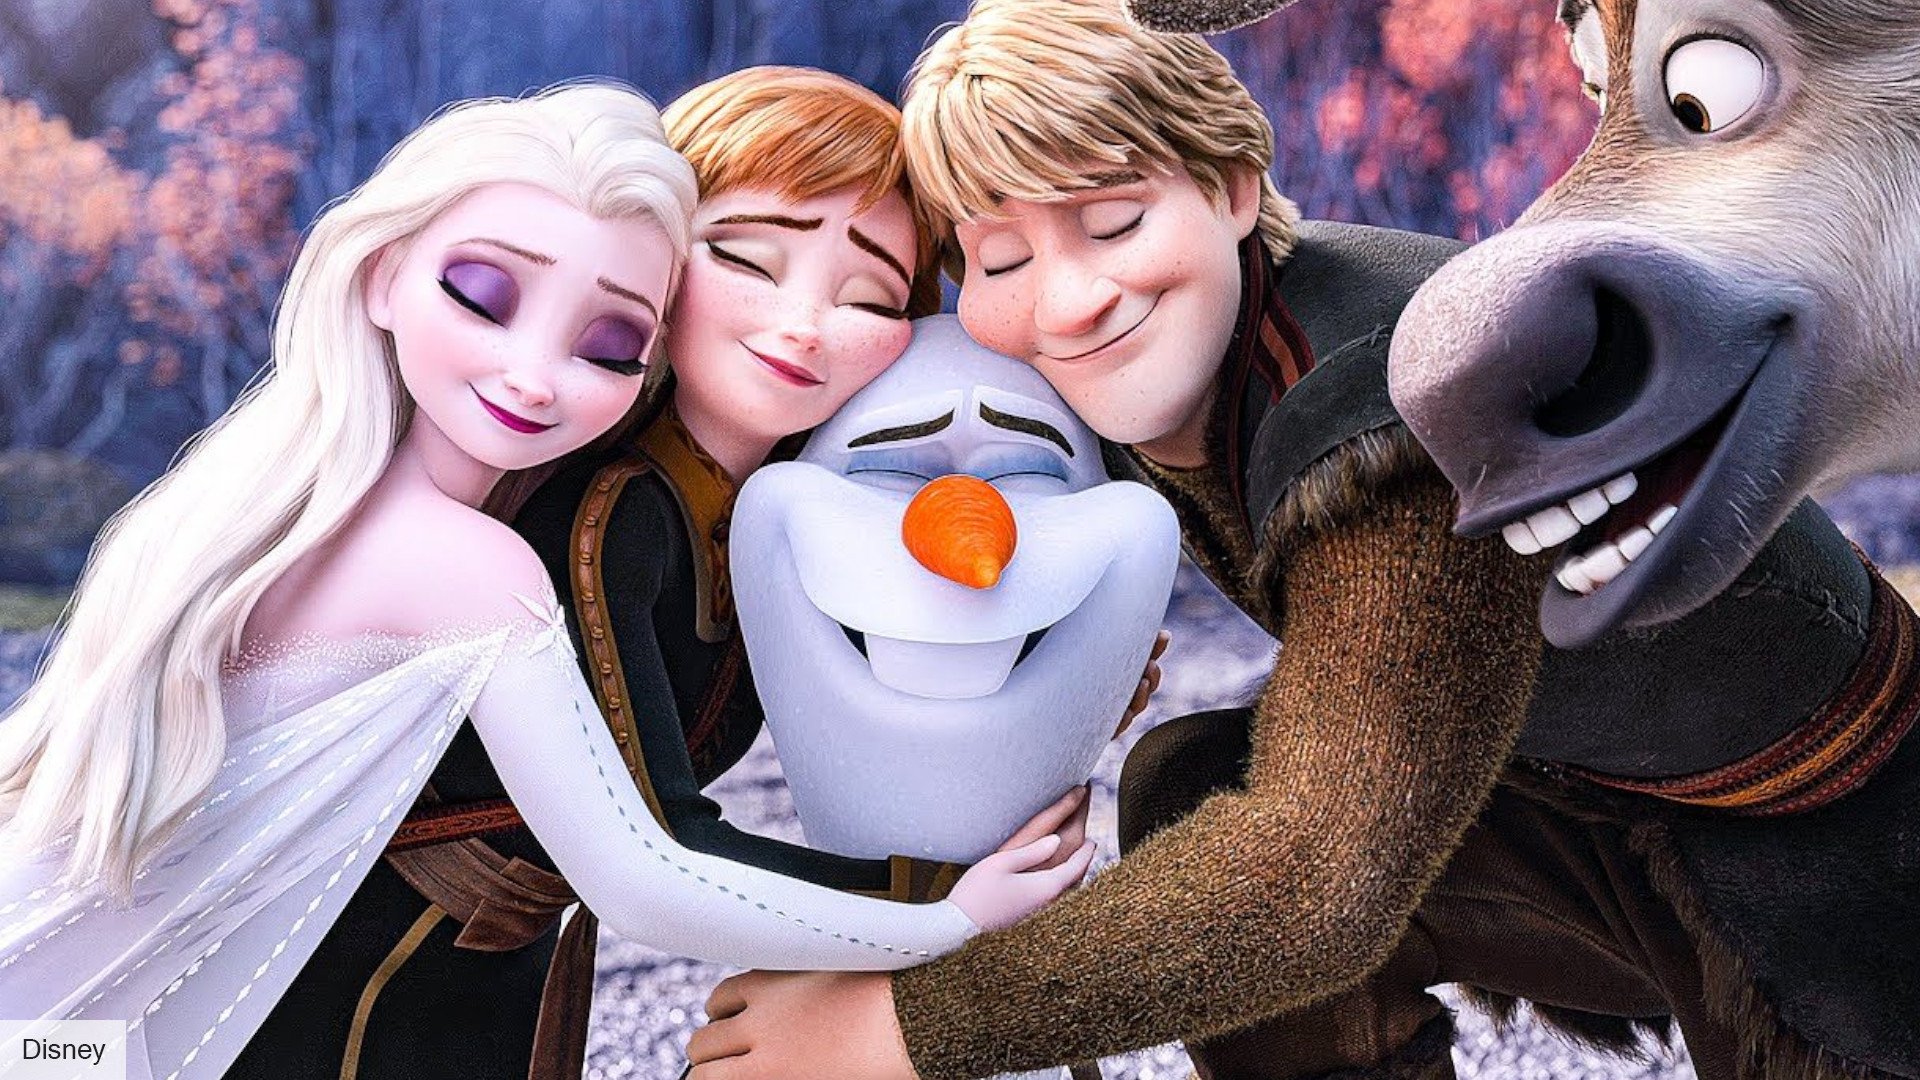 Frozen 3 release date: Elsa, Anna, Olaf, Kristoff, and Sven all hugging in Frozen 2